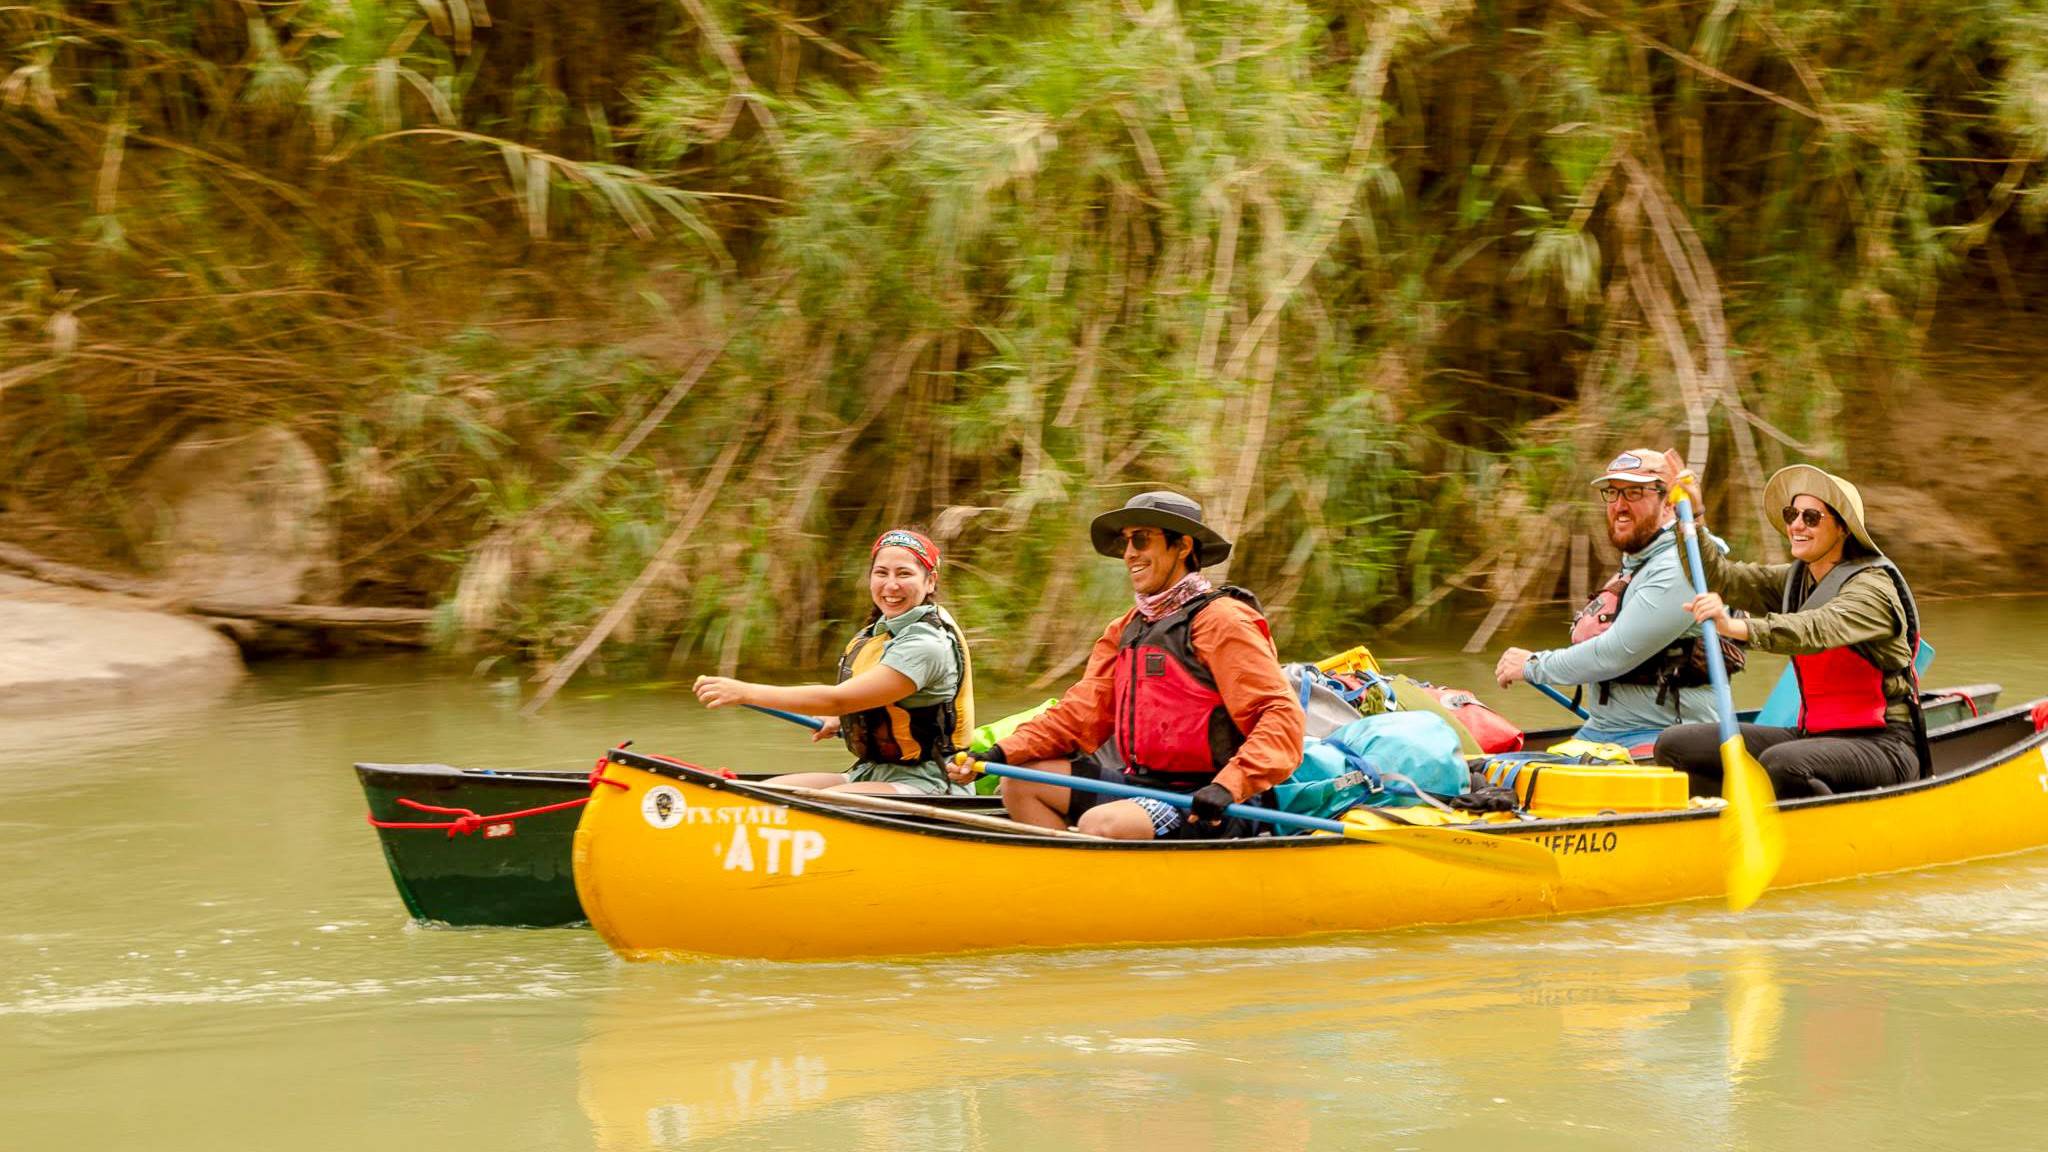 Students Canoeing on a River